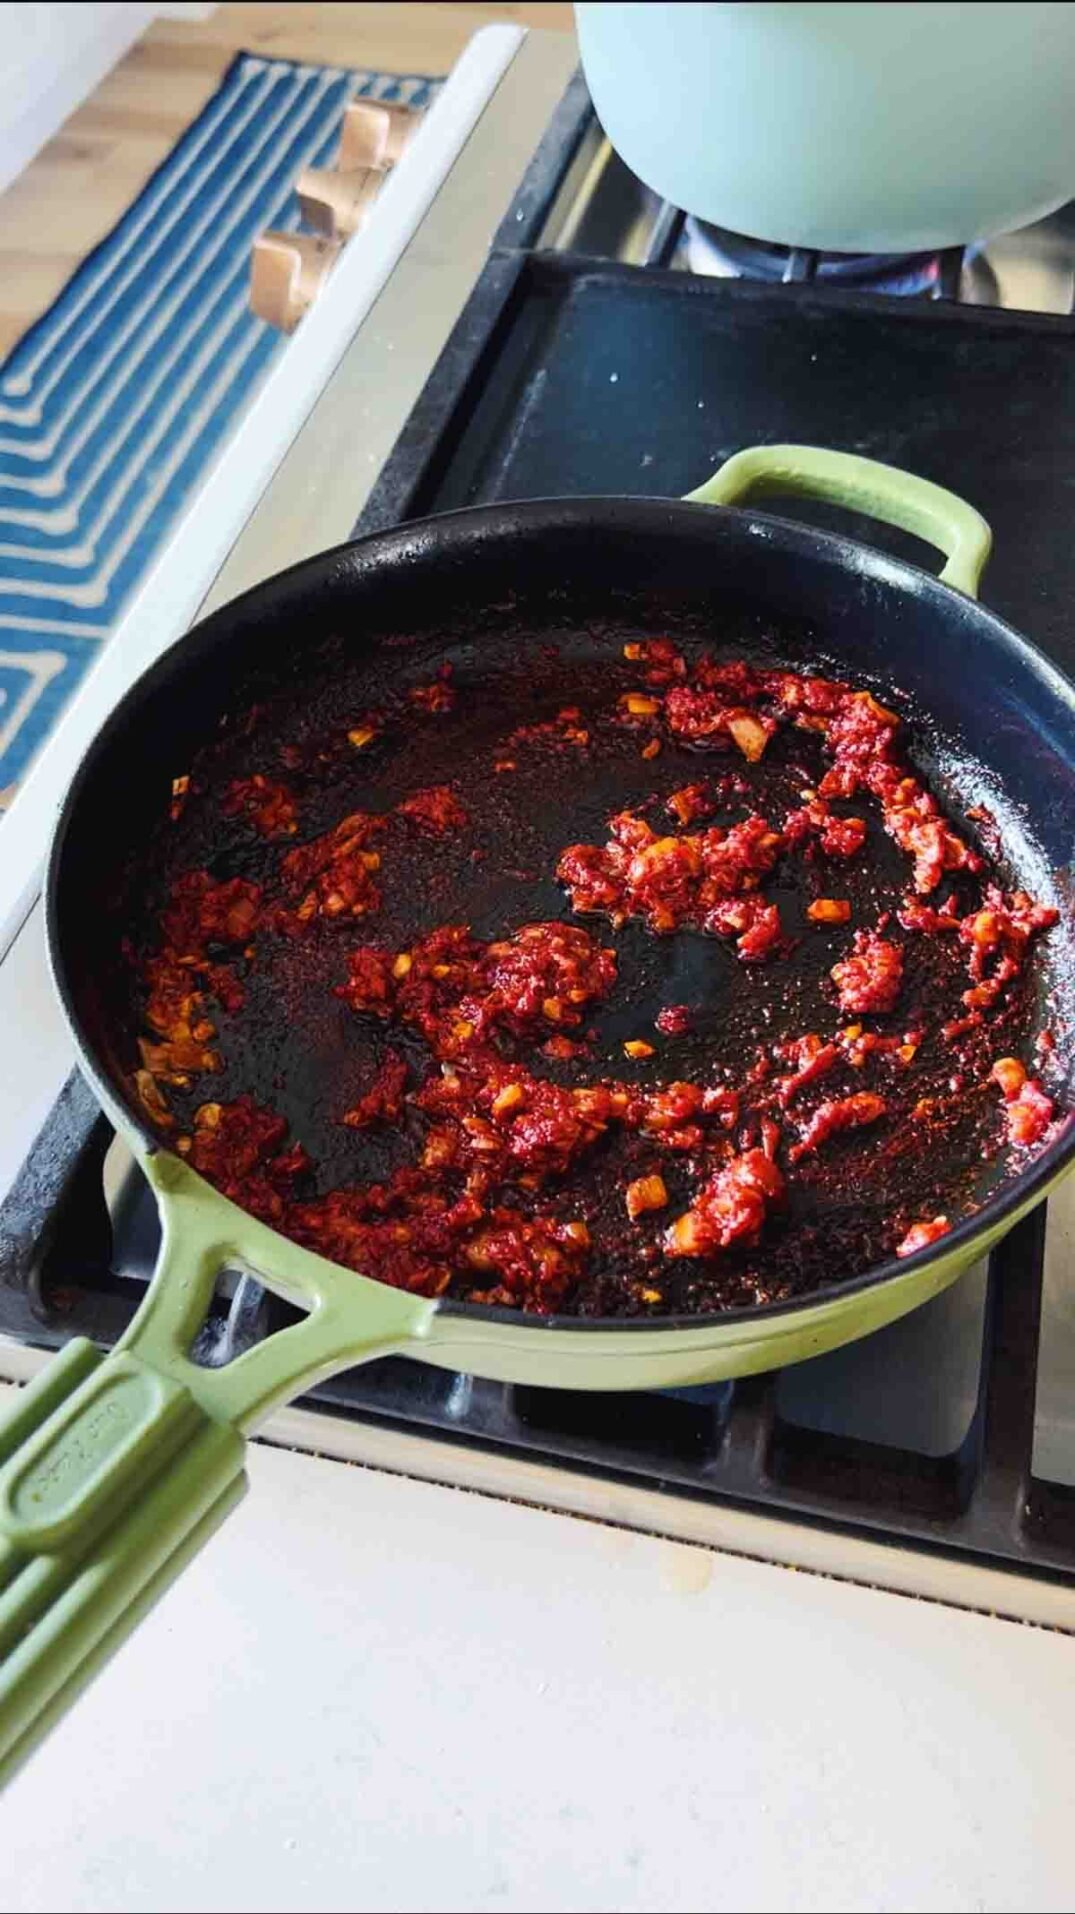 tomato paste in a green cast iron skillet on the stovetop.